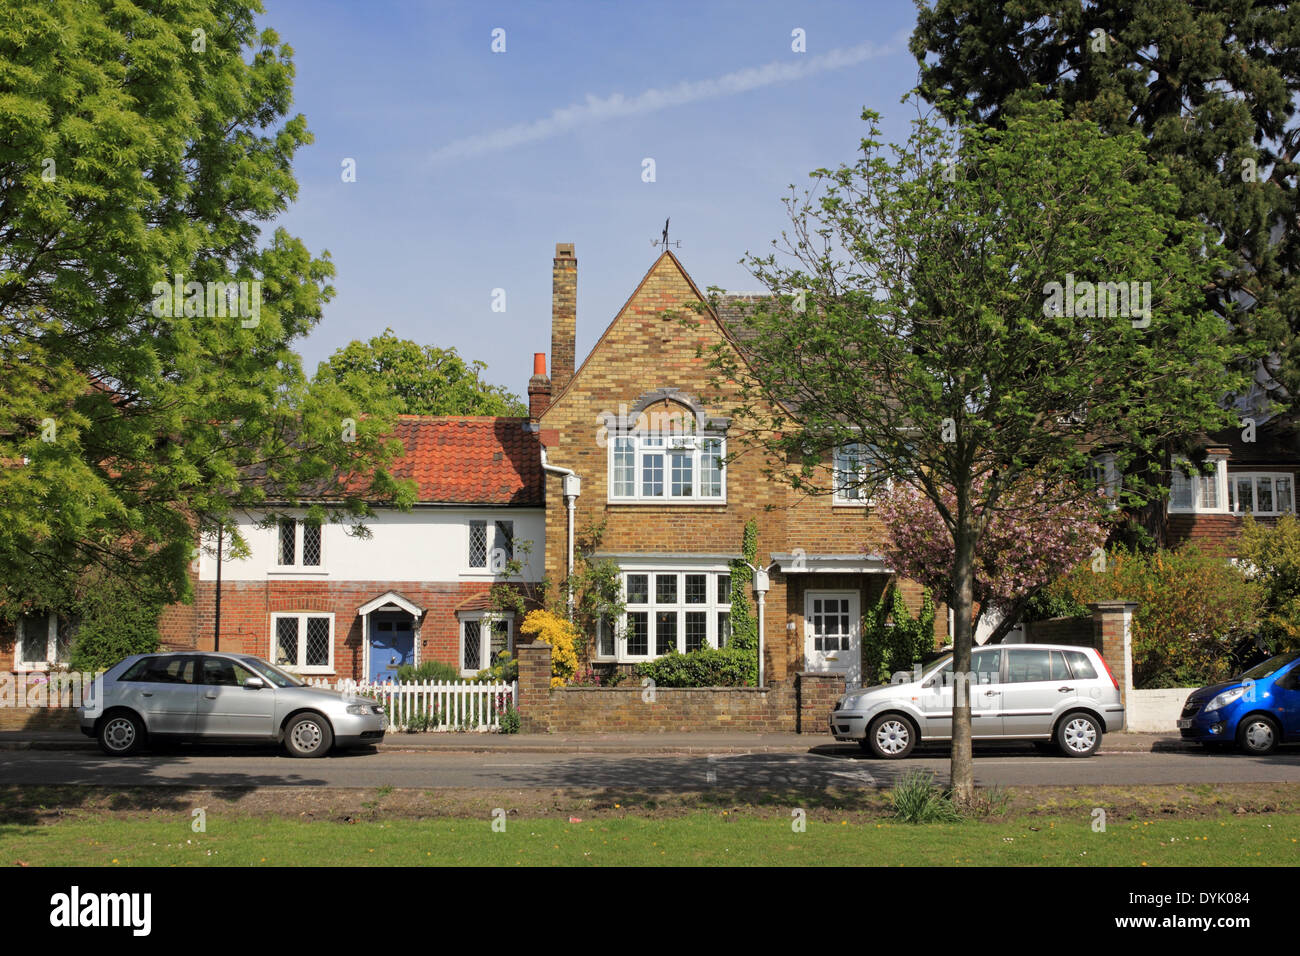 Gigg's Hill Green, Thames Ditton, Surrey, England, UK. Stock Photo